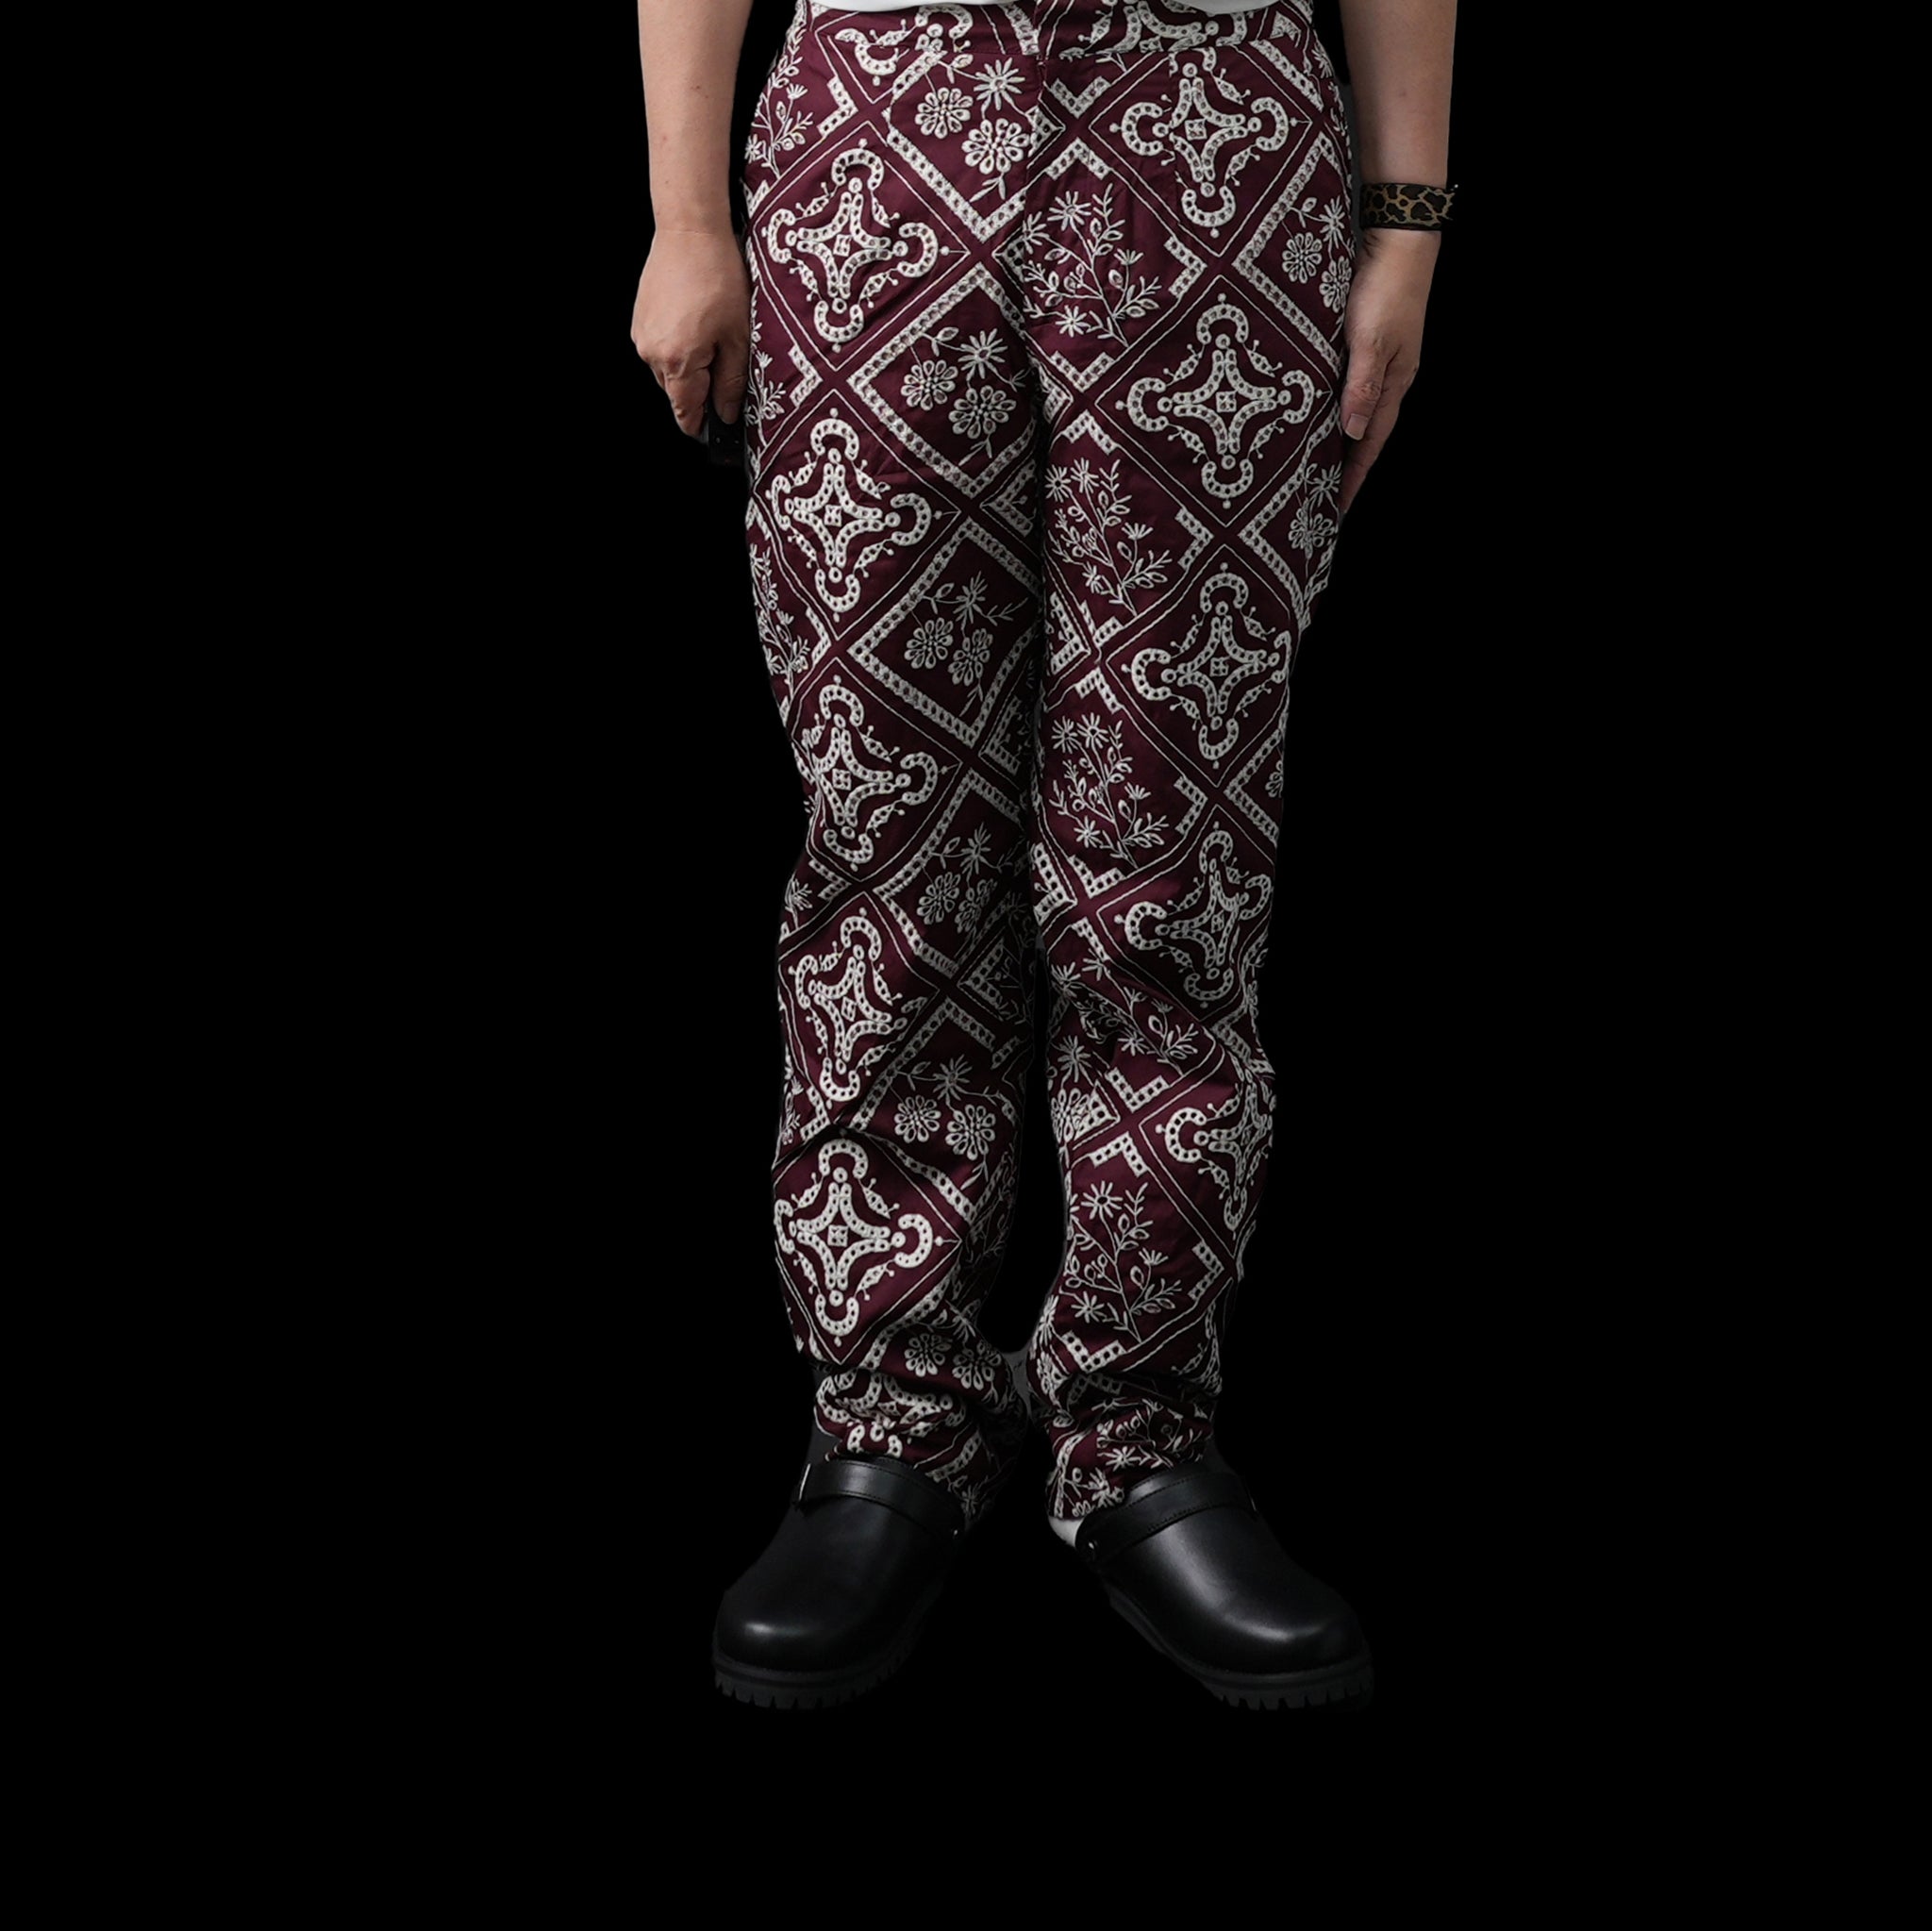 No:28SM02TRM028BRG | Name:Garnet Embroidered Tailored Trousers | Color:Burgundy【SISTER JANE_シスタージェーン】